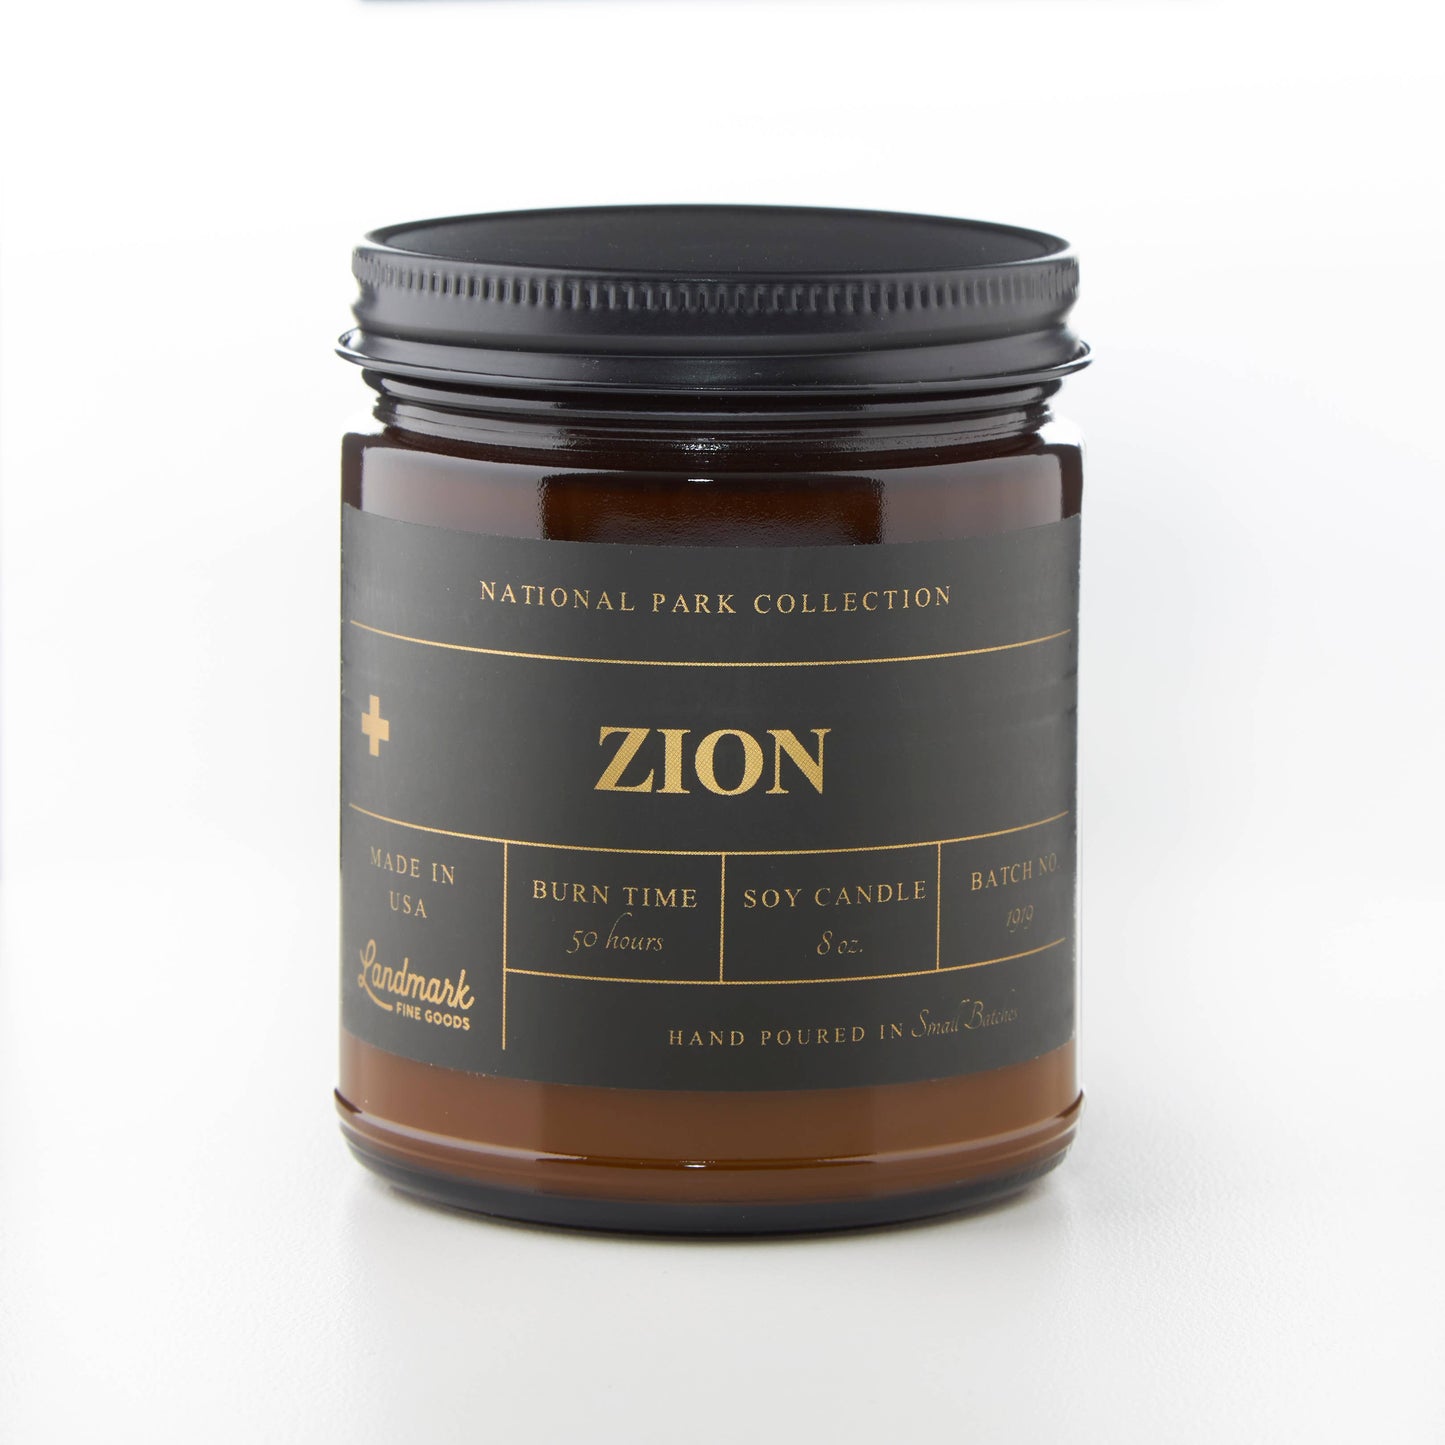 National Park Collection™ Candle - Zion